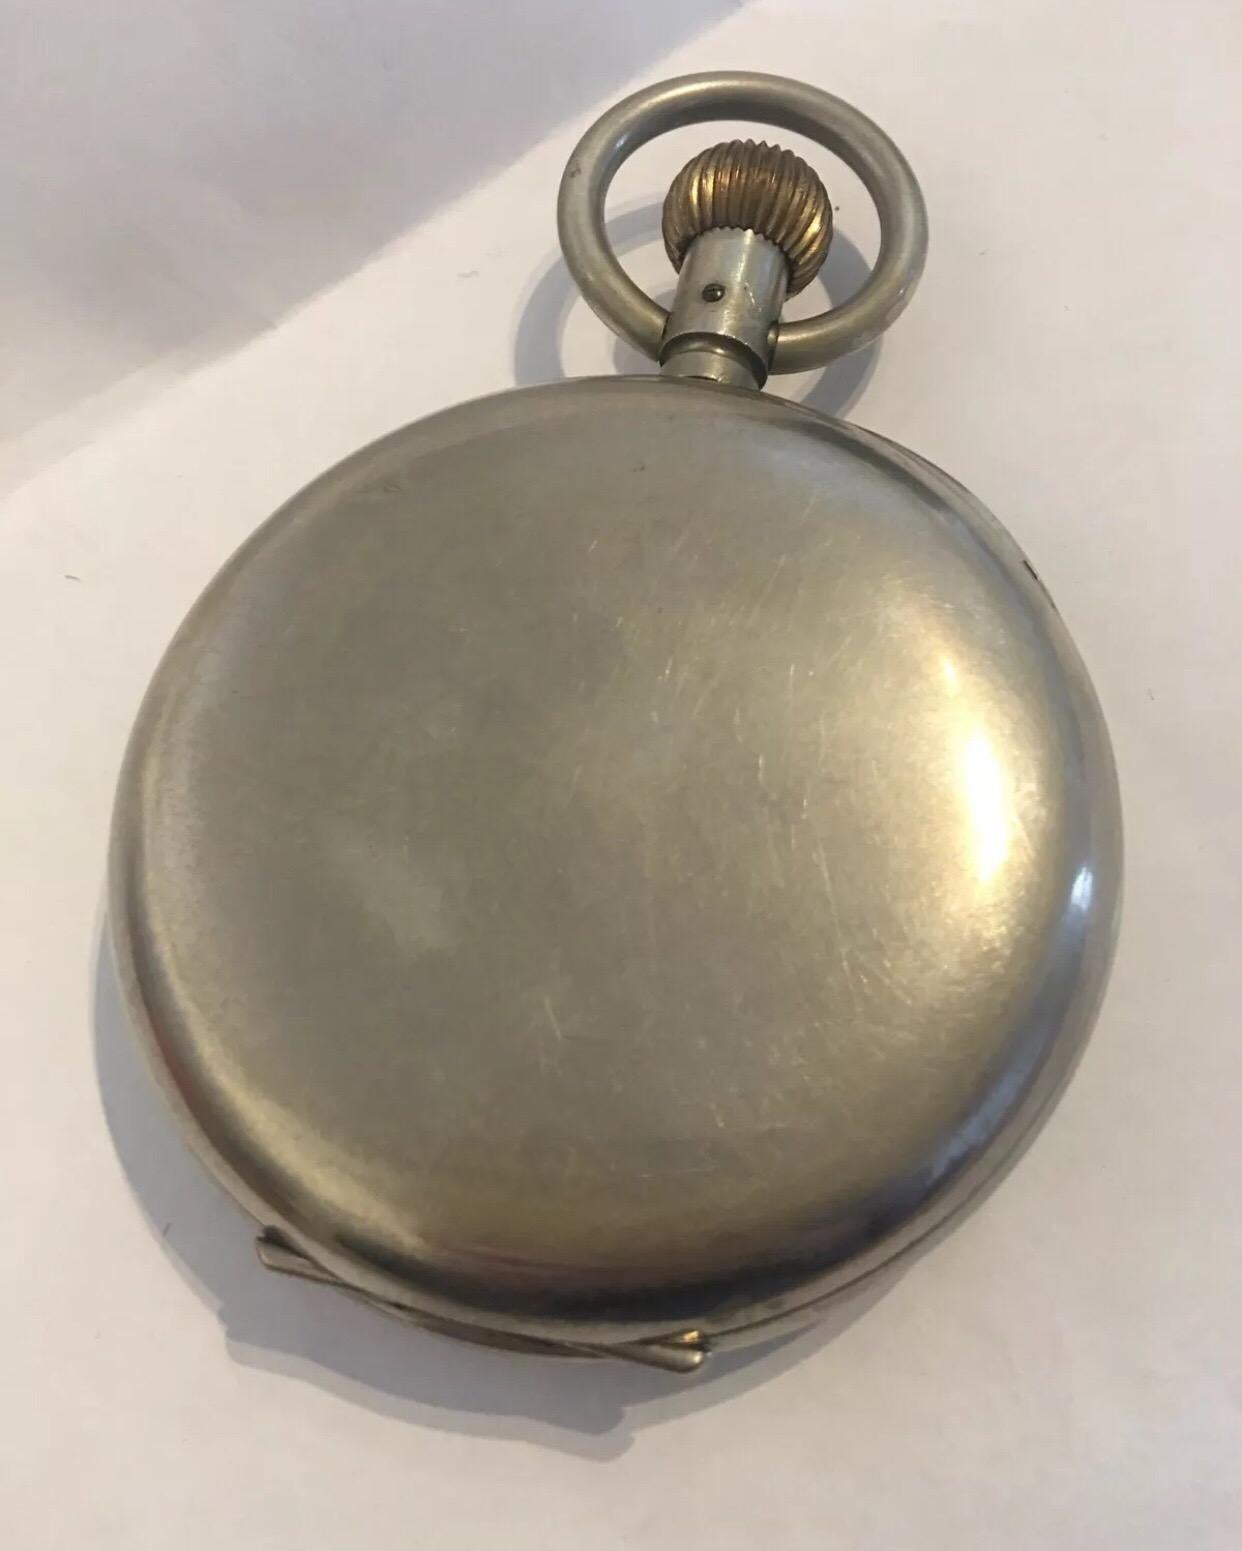 
This big heavy quarter repeater pocket watch is in good working order and ticking well. There is chip on the glass as seen on photo.